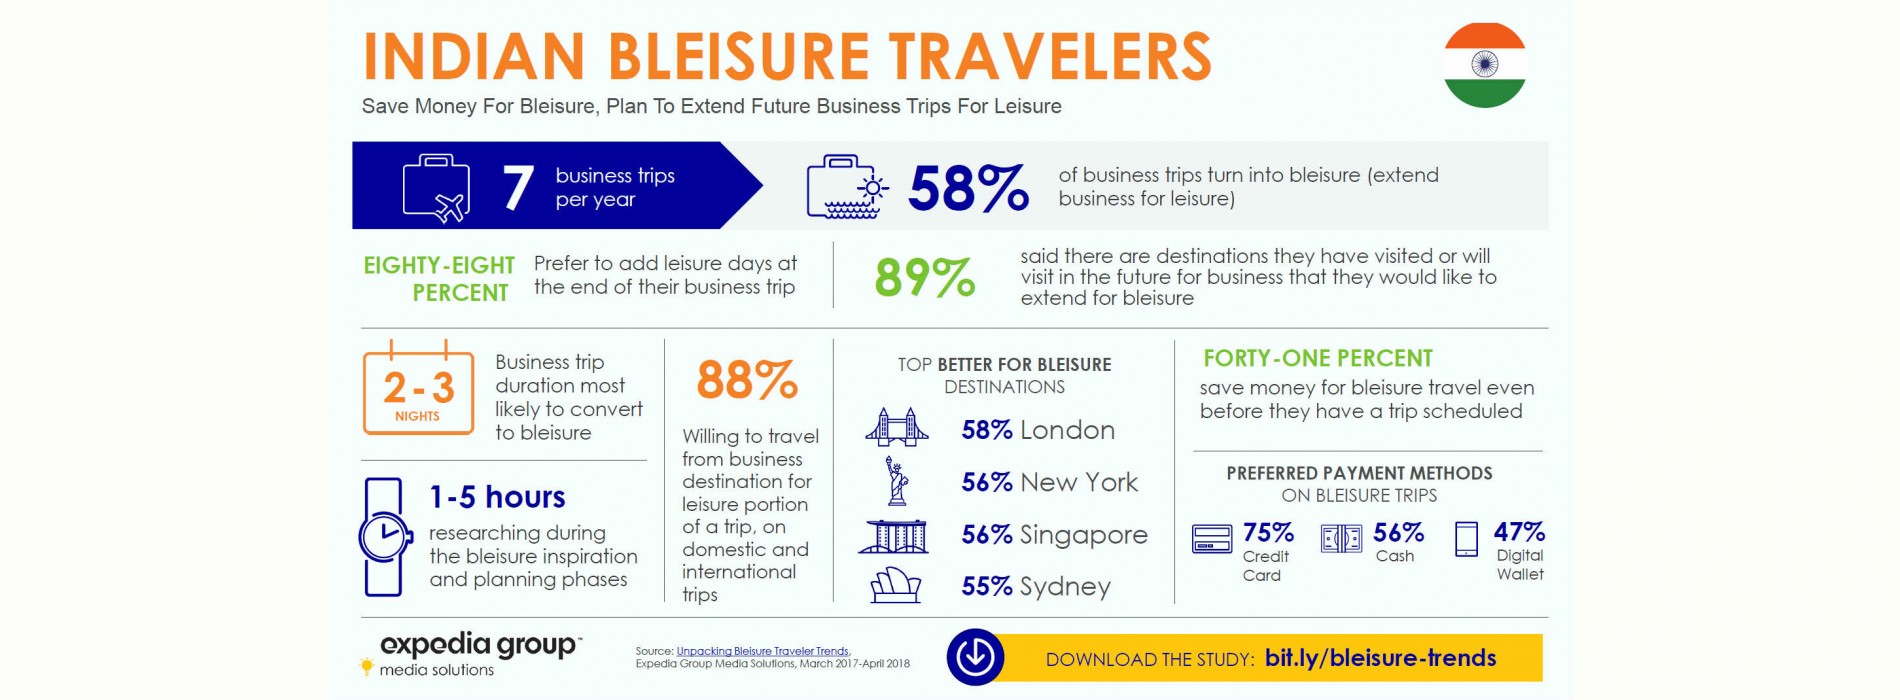 Bleisure booming among Indian business travelers: Expedia Group